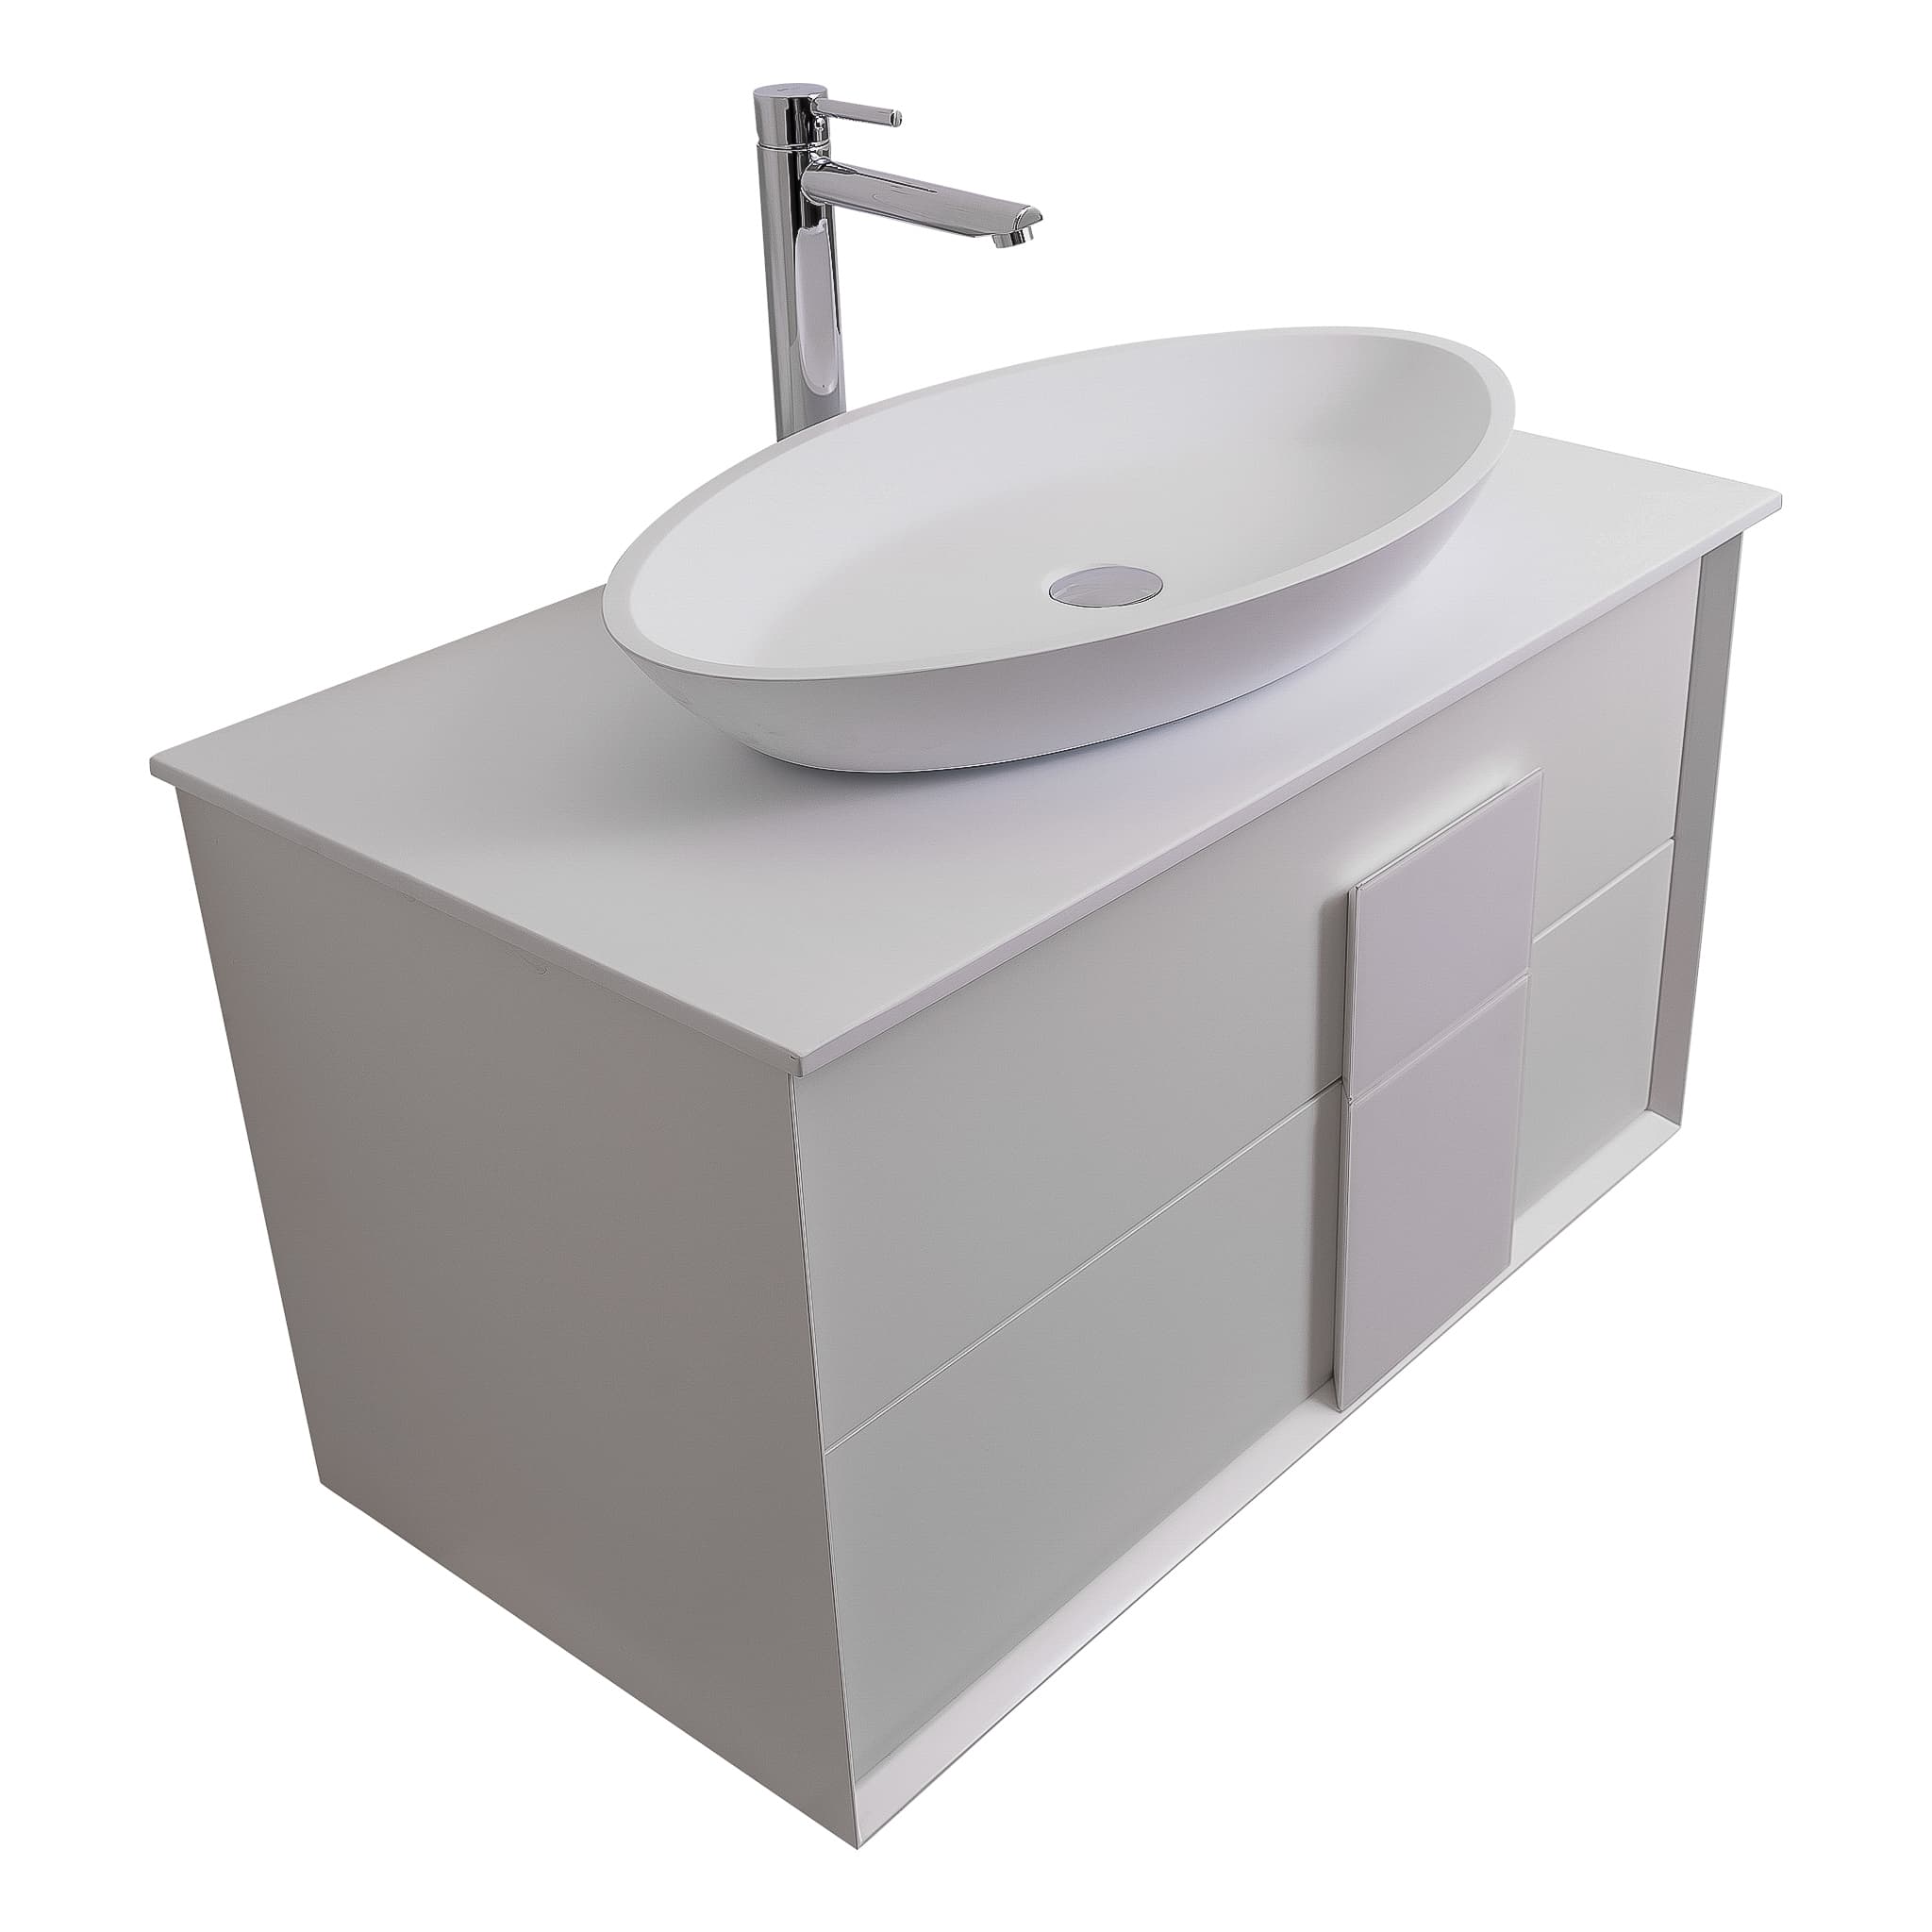 Piazza 31.5 Matte White With White Handle Cabinet, Solid Surface Flat White Counter and Oval Solid Surface White Basin 1305, Wall Mounted Modern Vanity Set